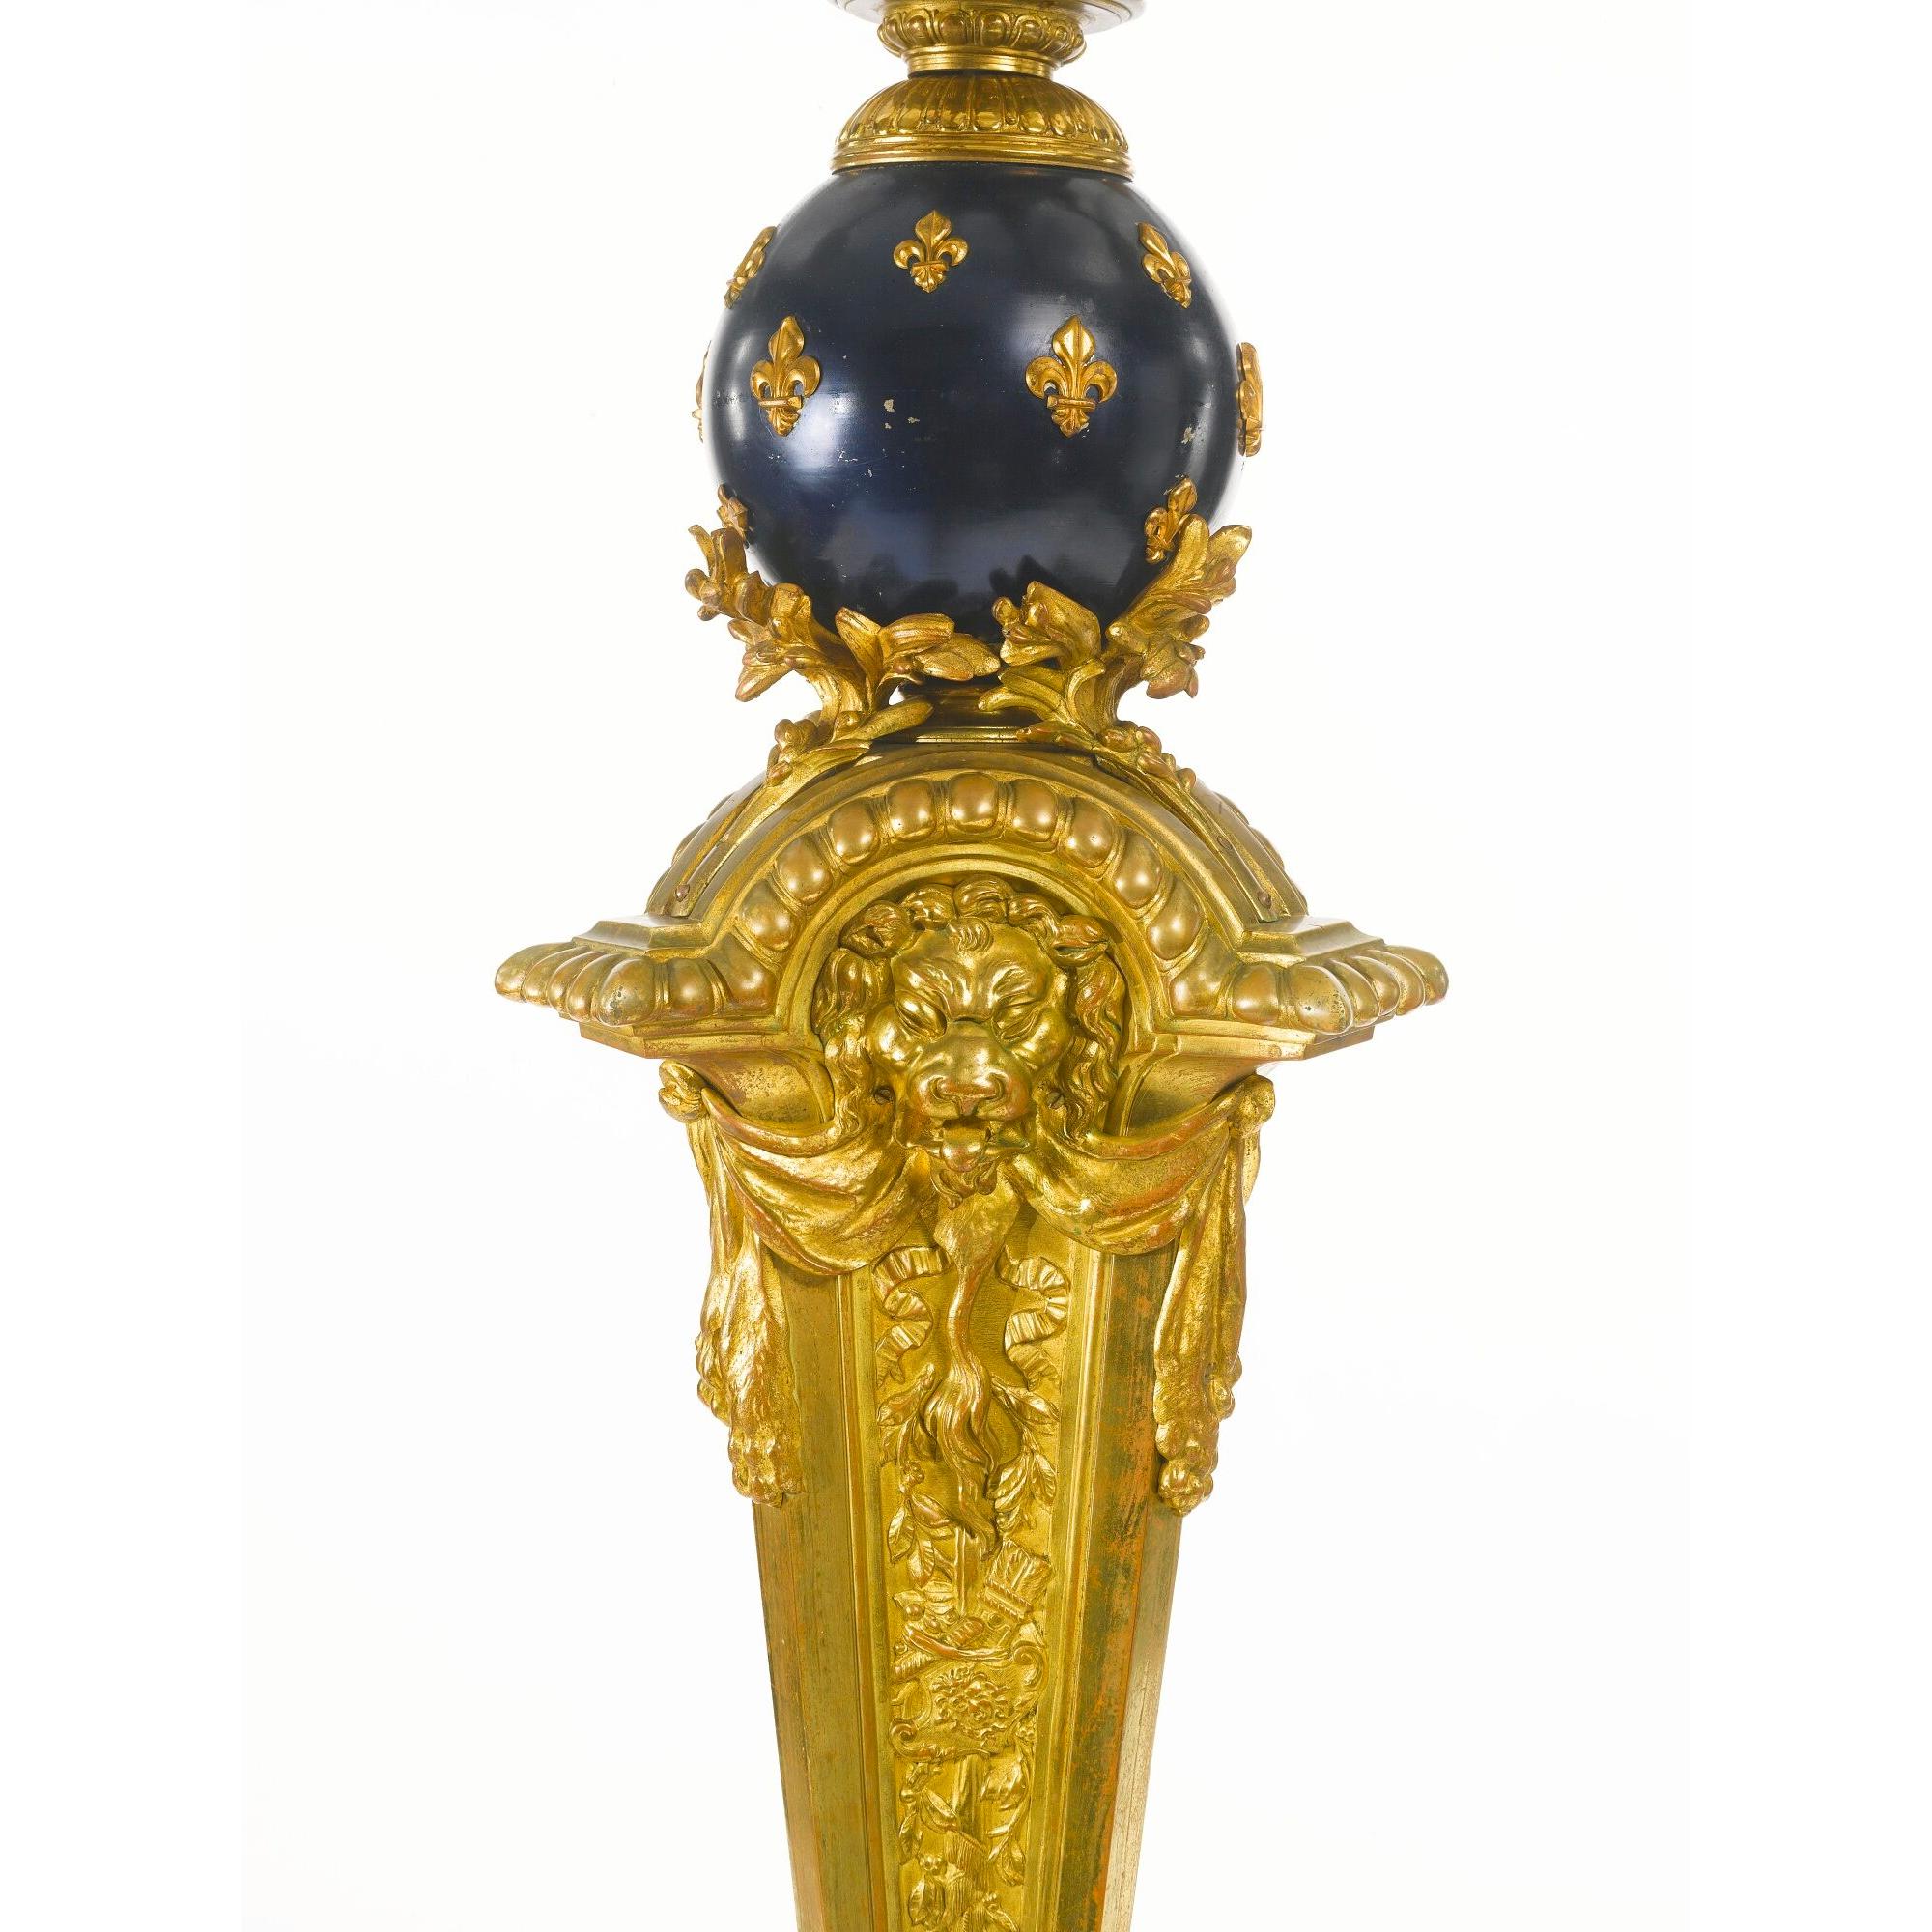 A fine quality monumental Louis XIV style gilt bronze and blue steel six-light floor torchère on a molded Carrara marble base.

Origin: French
Date: circa 1870
Dimension: 7 ft. 5 in. x 26 in.